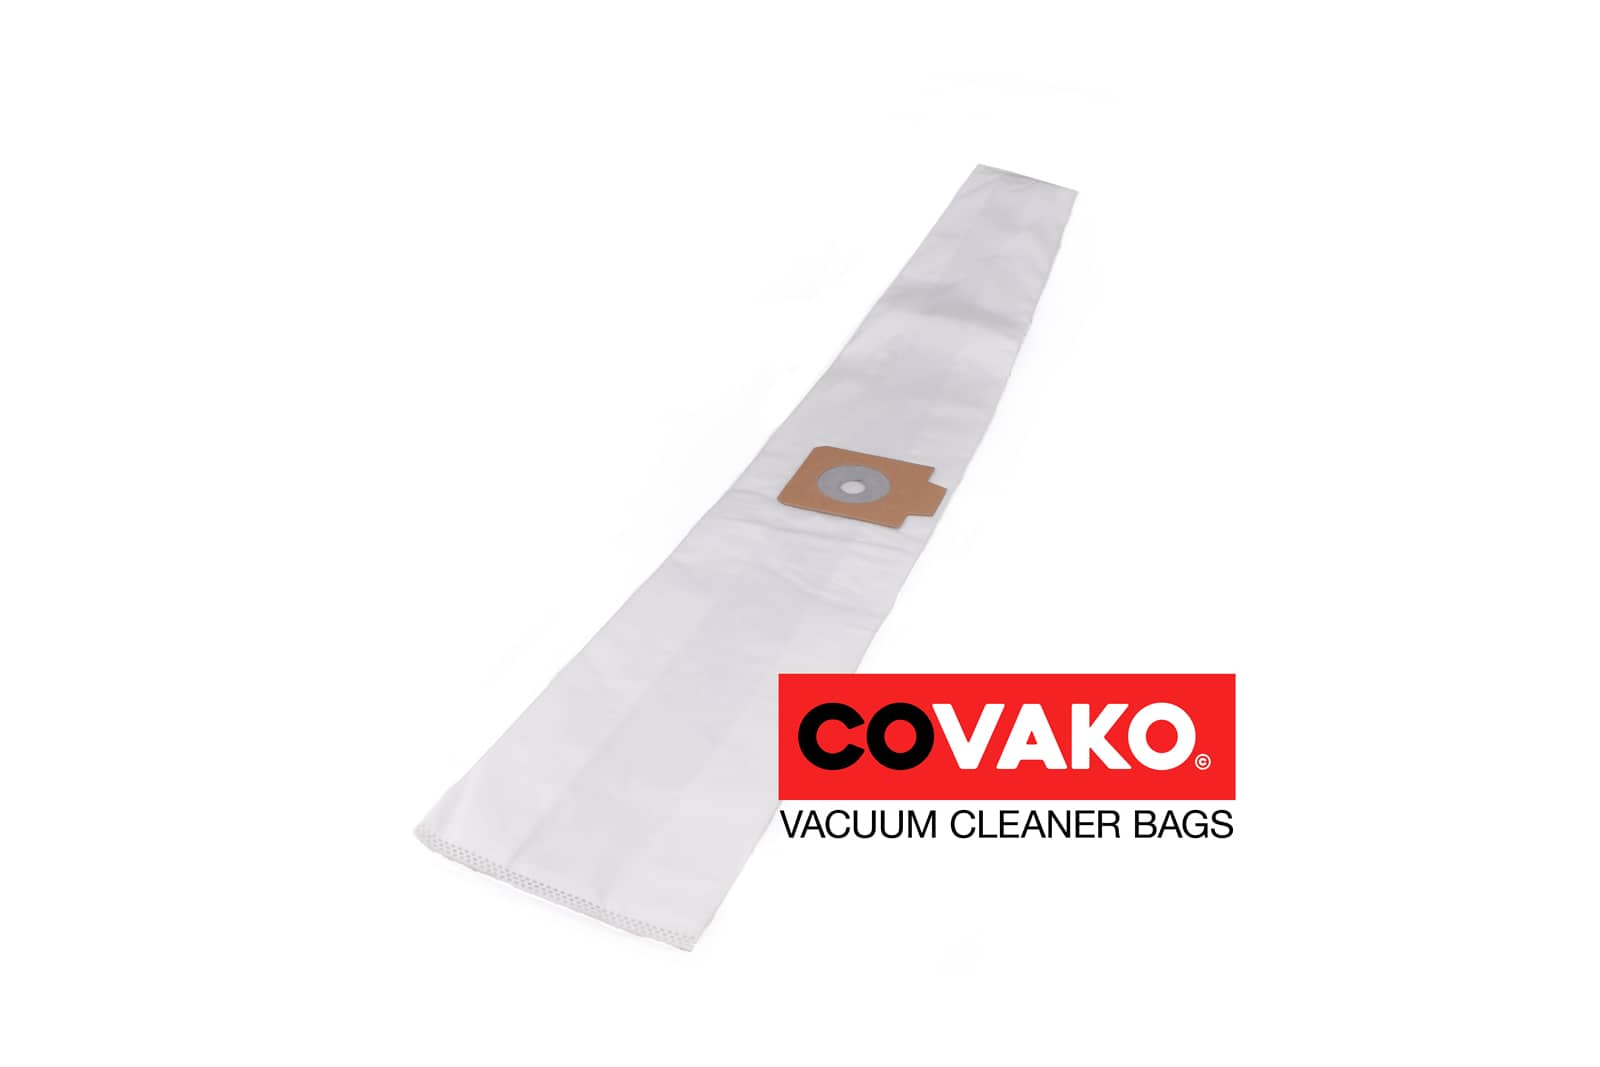 Electrolux UZ 930 S / Synthesis - Electrolux vacuum cleaner bags